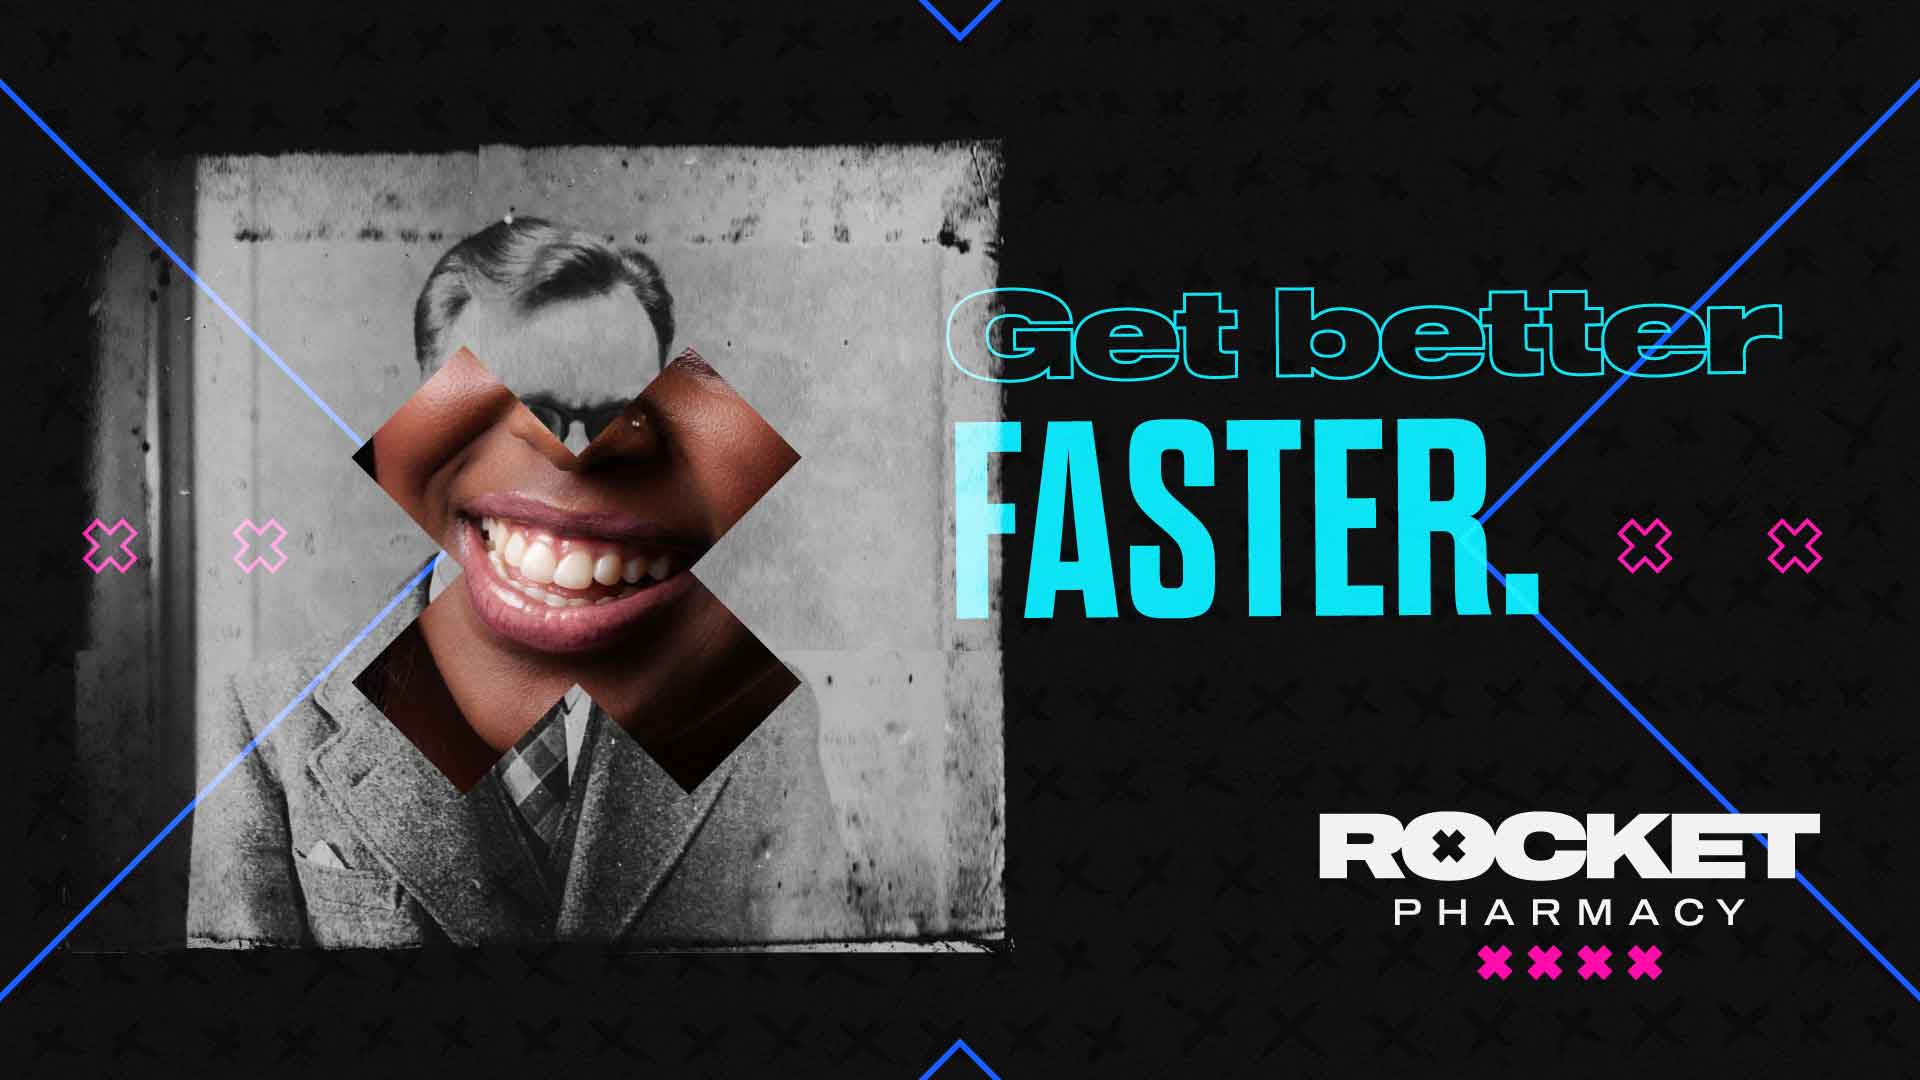 Rocket Pharmacy brand design key graphic which reads "Get better faster."